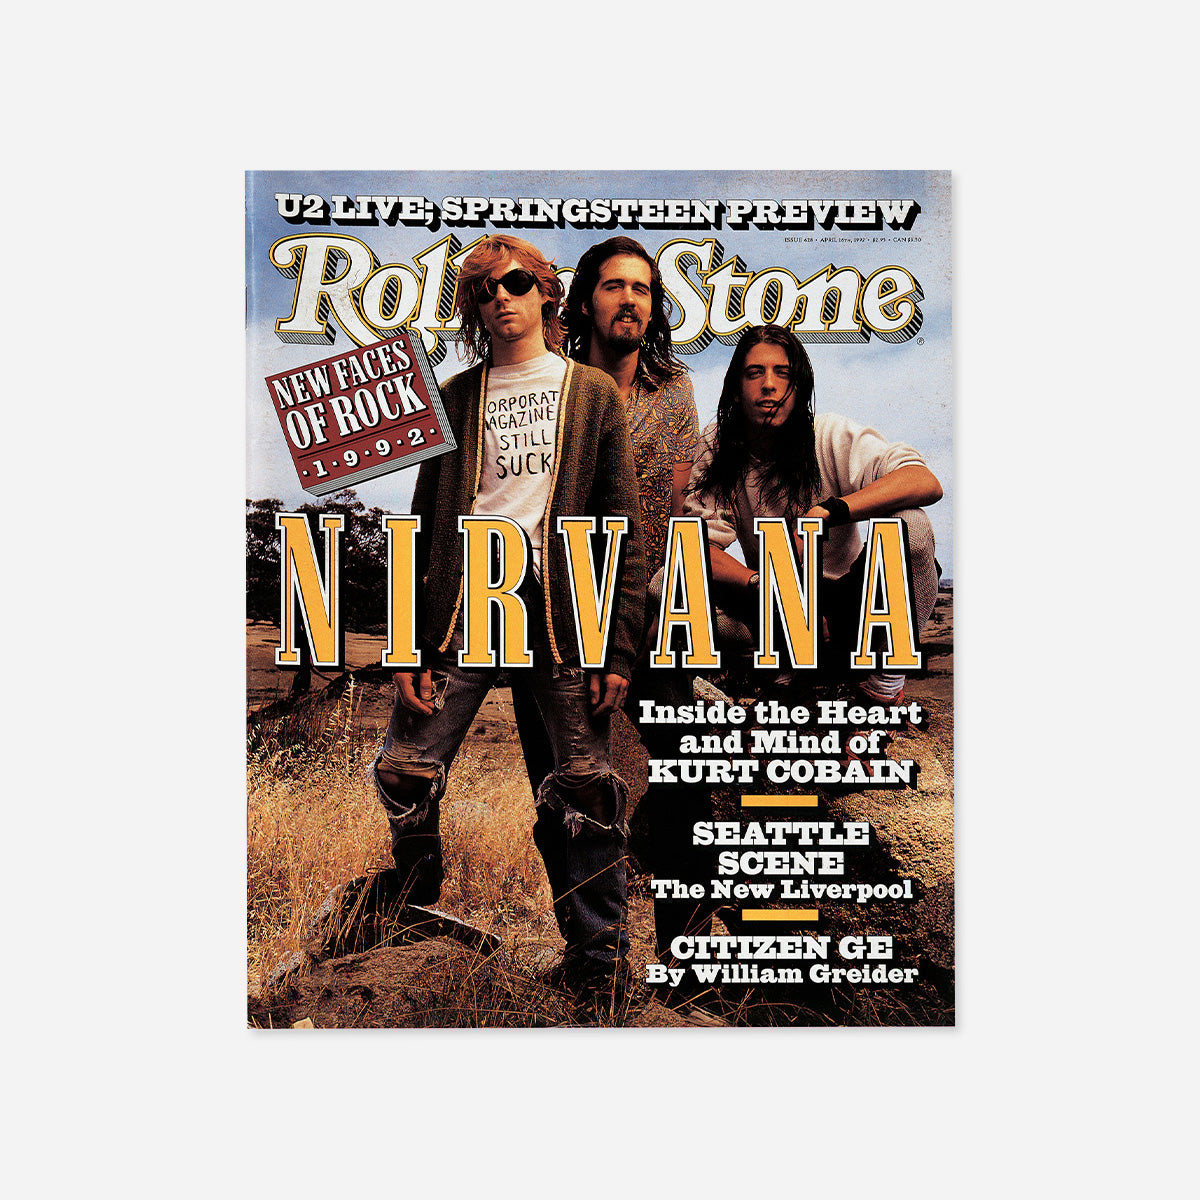 Rolling Stone Magazine April 16, 1992 Featuring Nirvana (Issue 628)